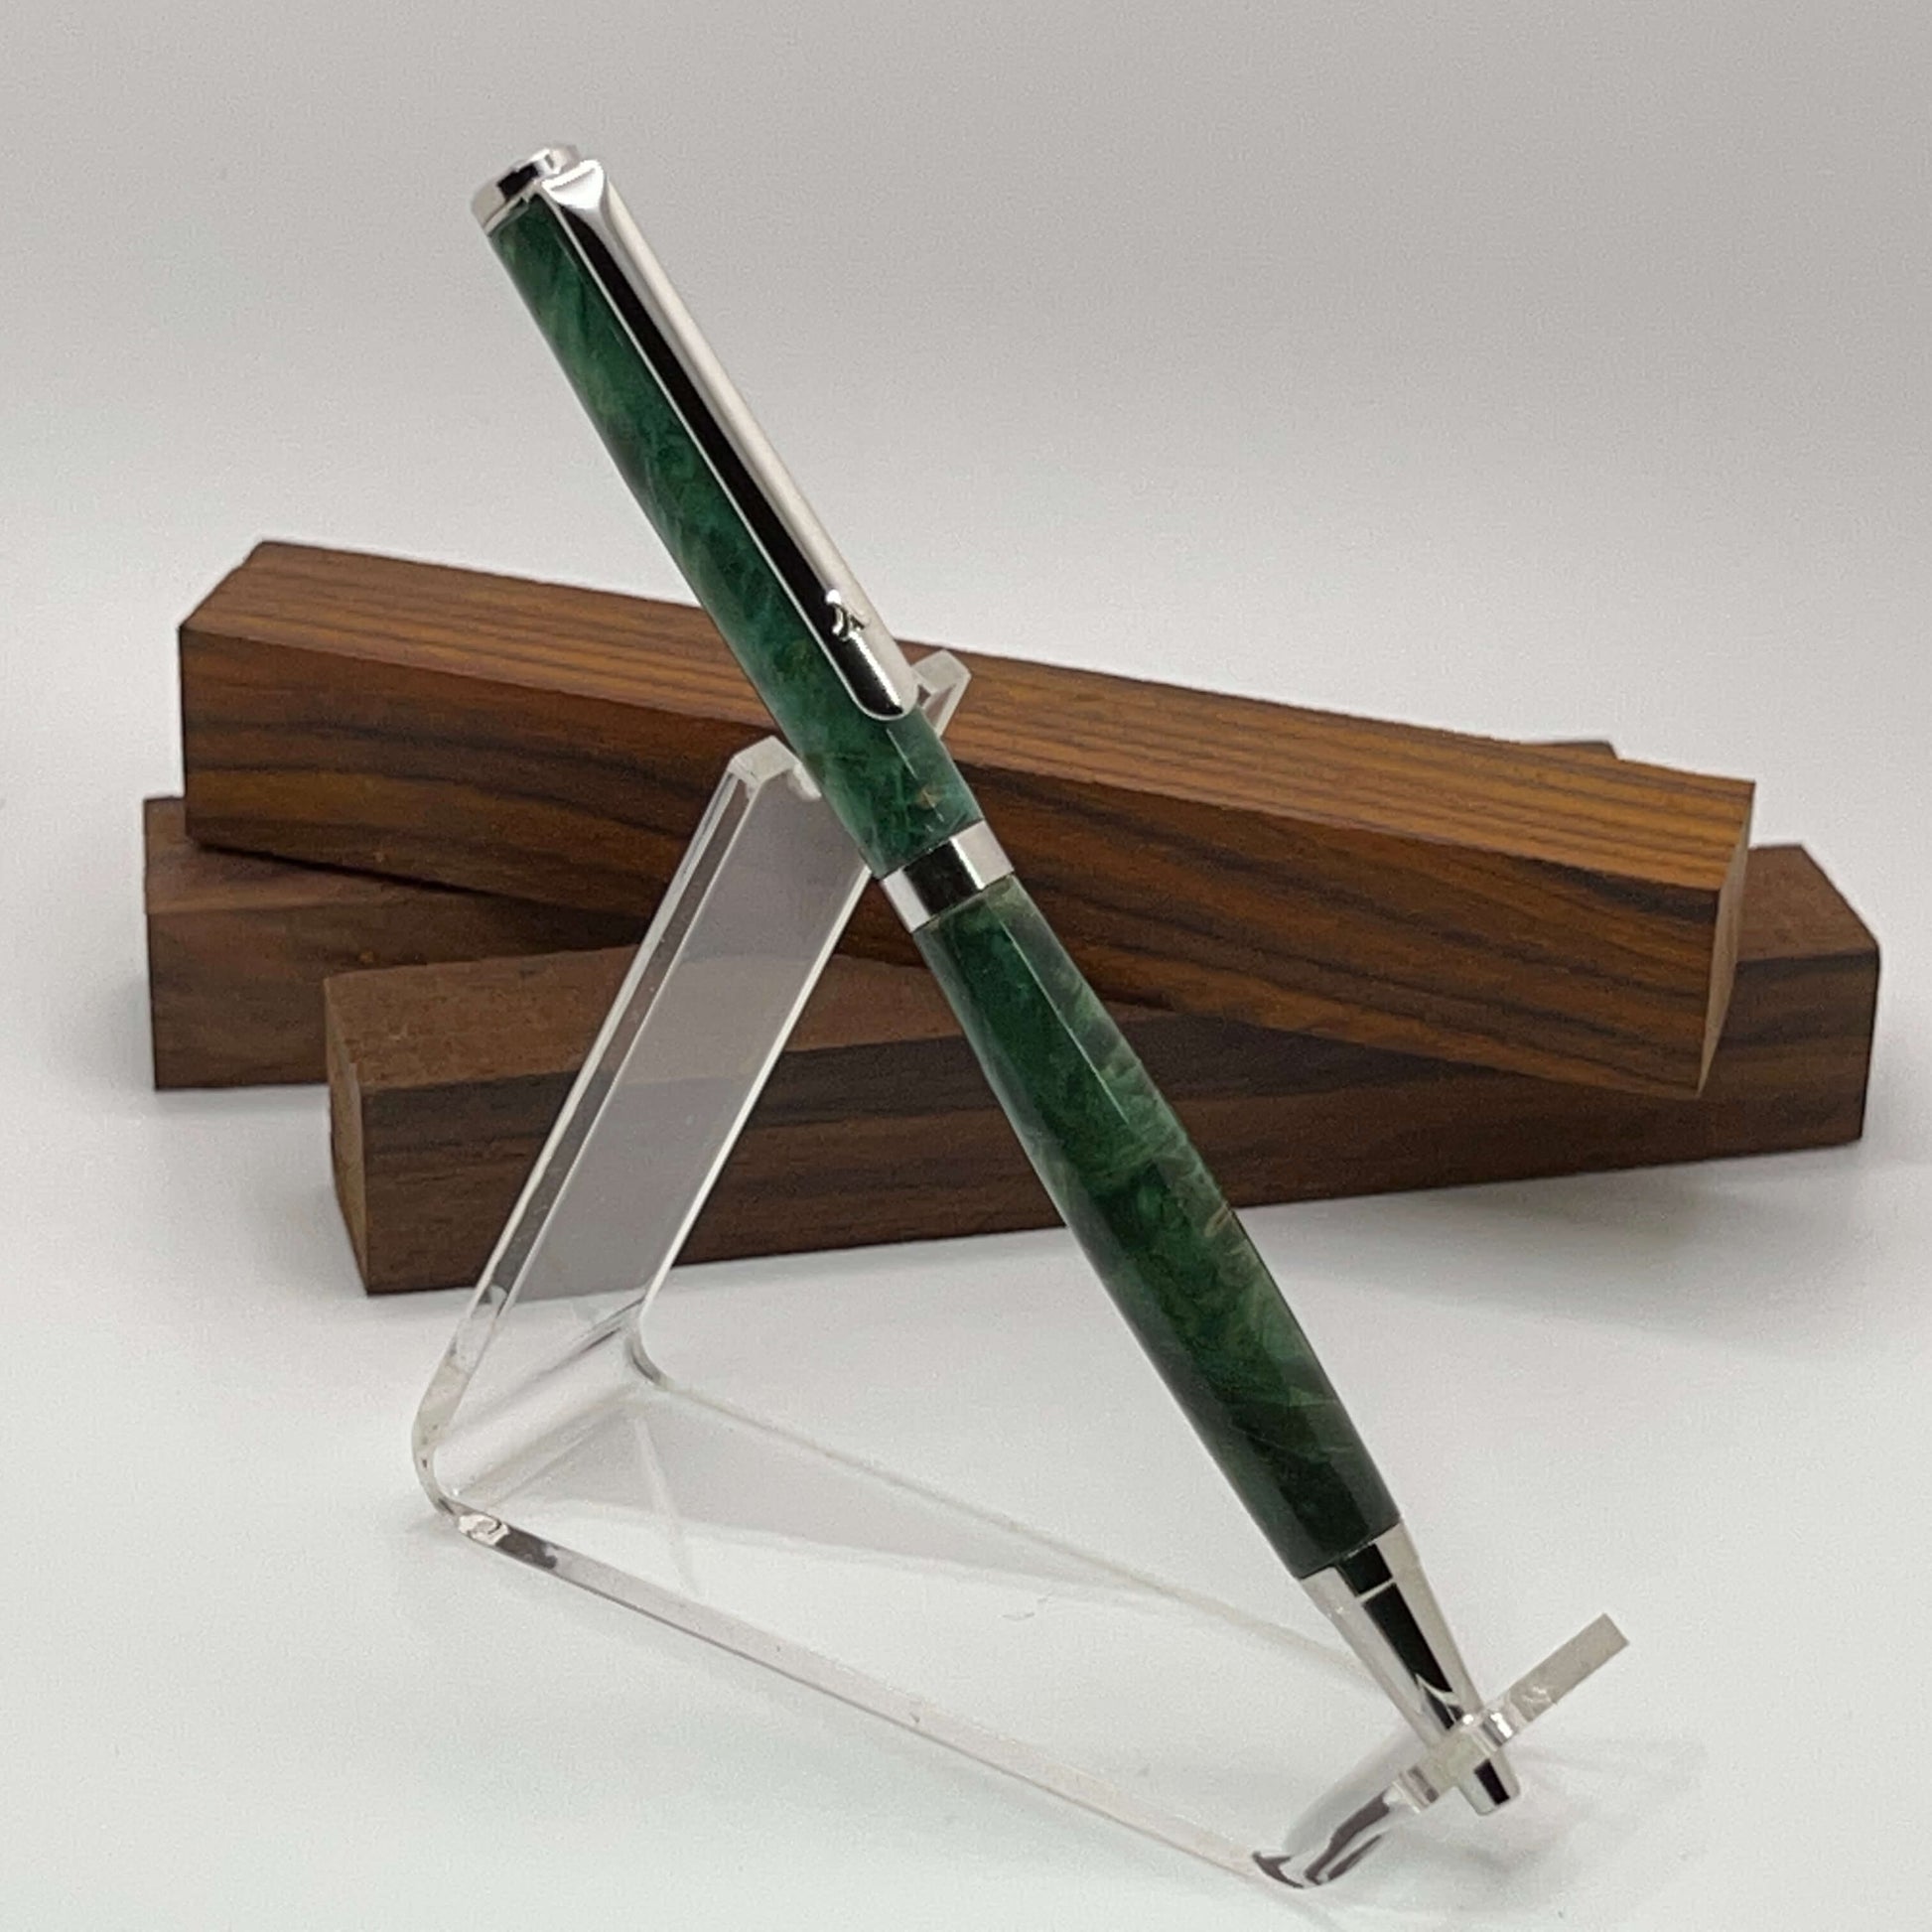 Handcrafted pen with Box Elder Burl wood dyed green and rhodium hardware